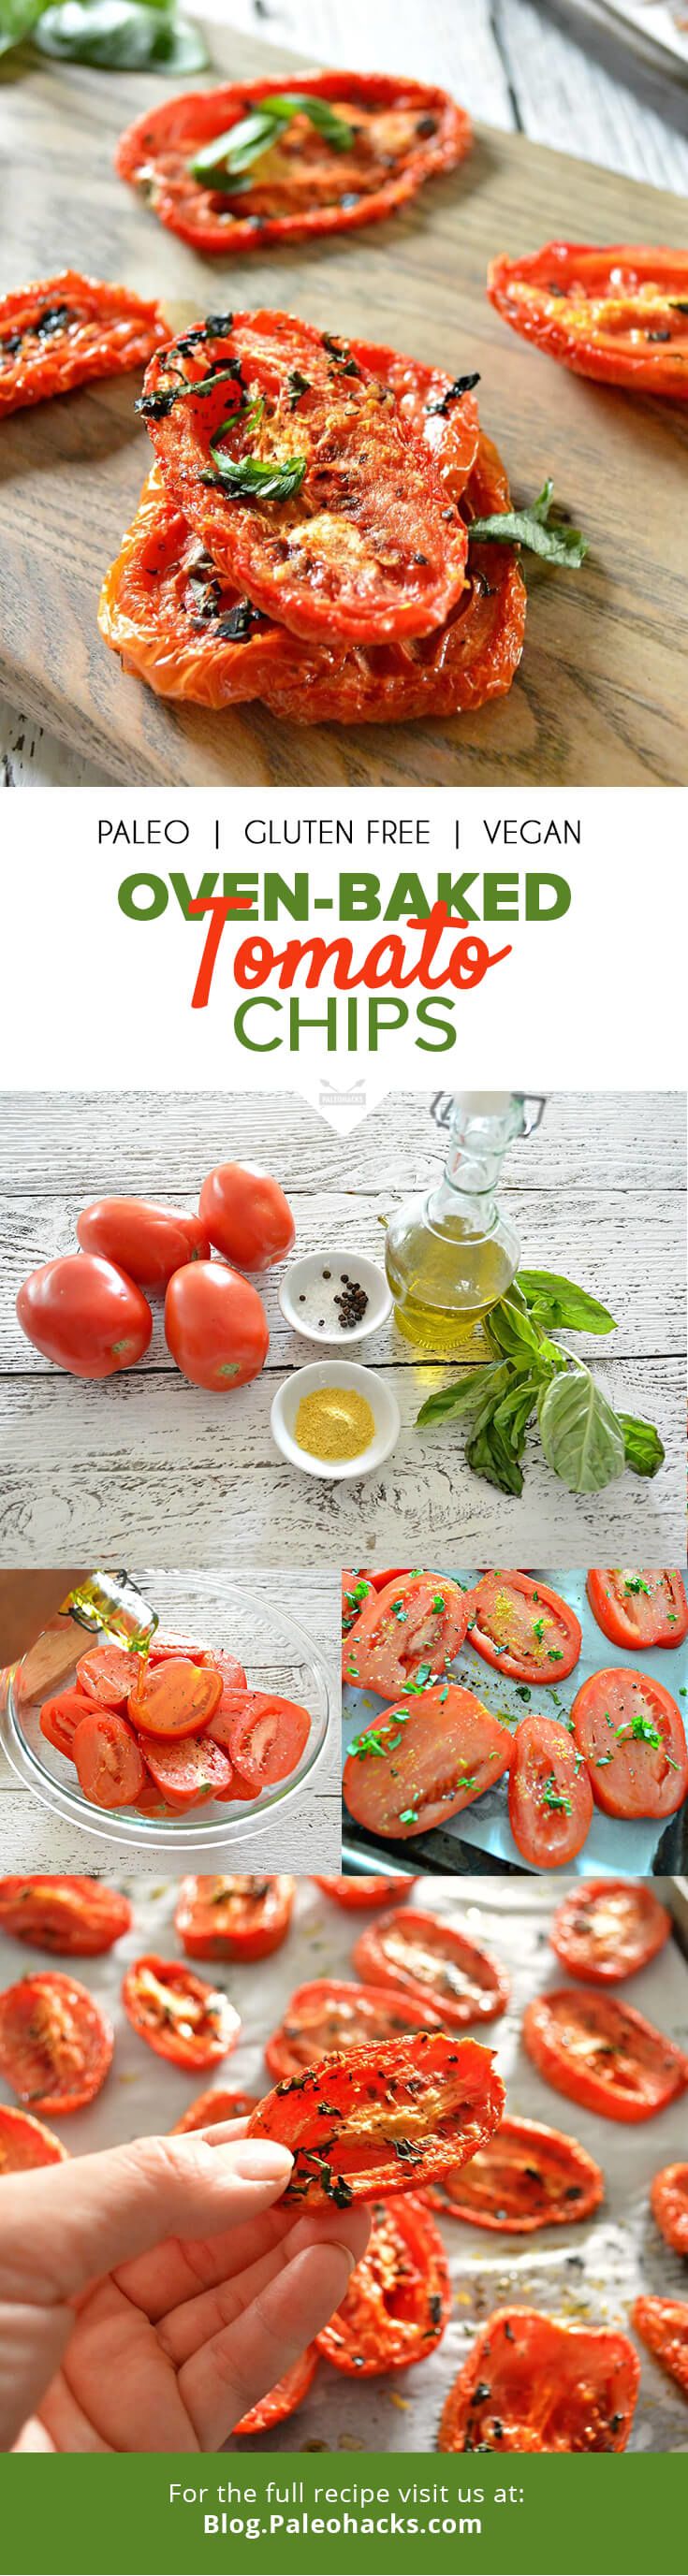 tomato chips pin